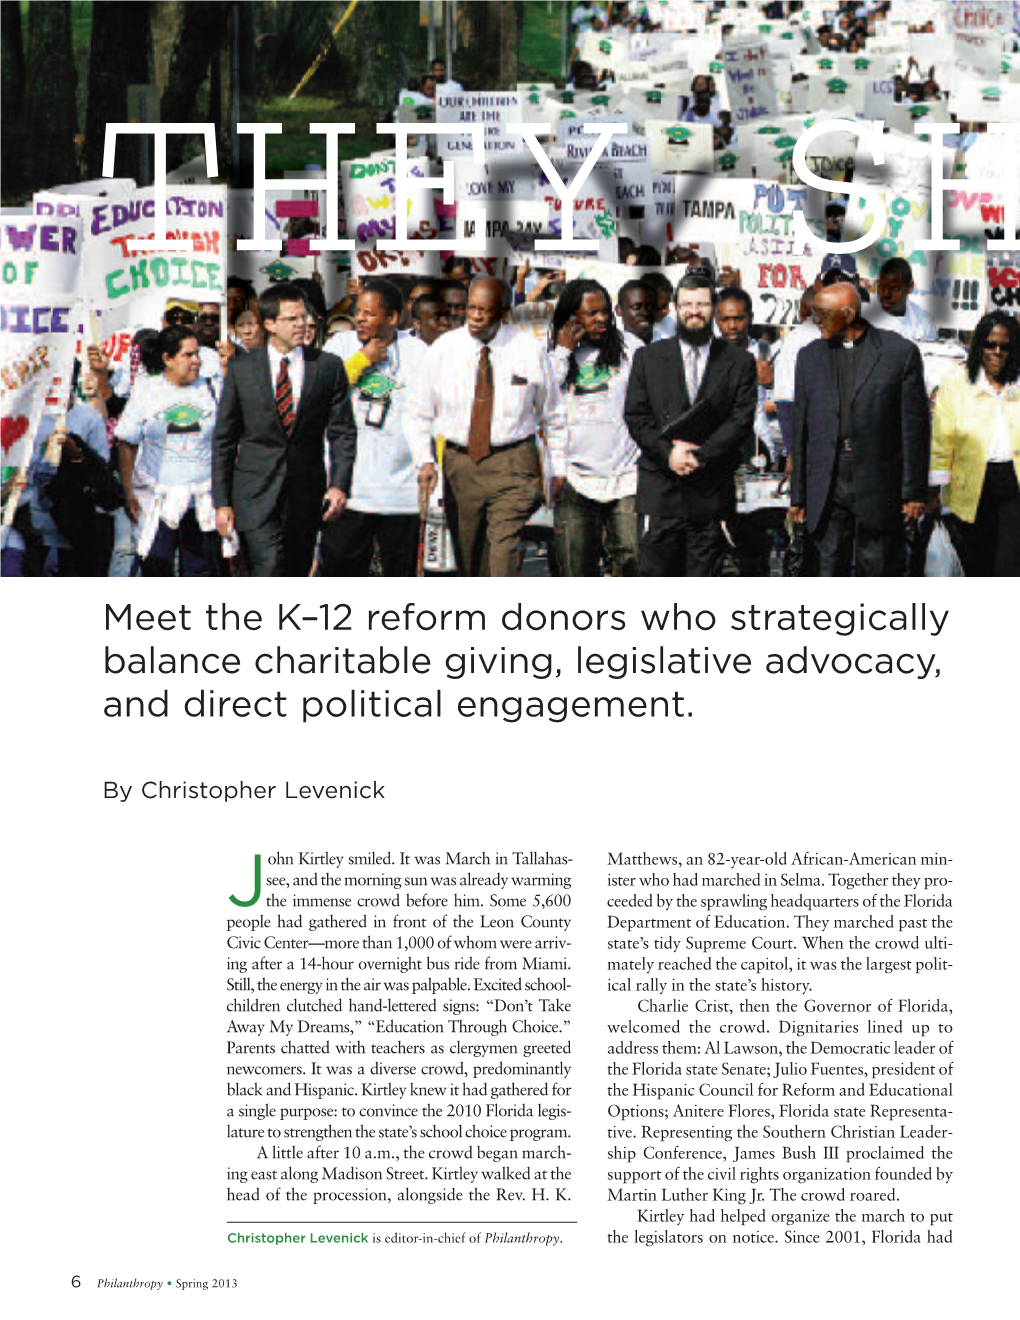 Meet the K–12 Reform Donors Who Strategically Balance Charitable Giving, Legislative Advocacy , and Direct Political Engagement